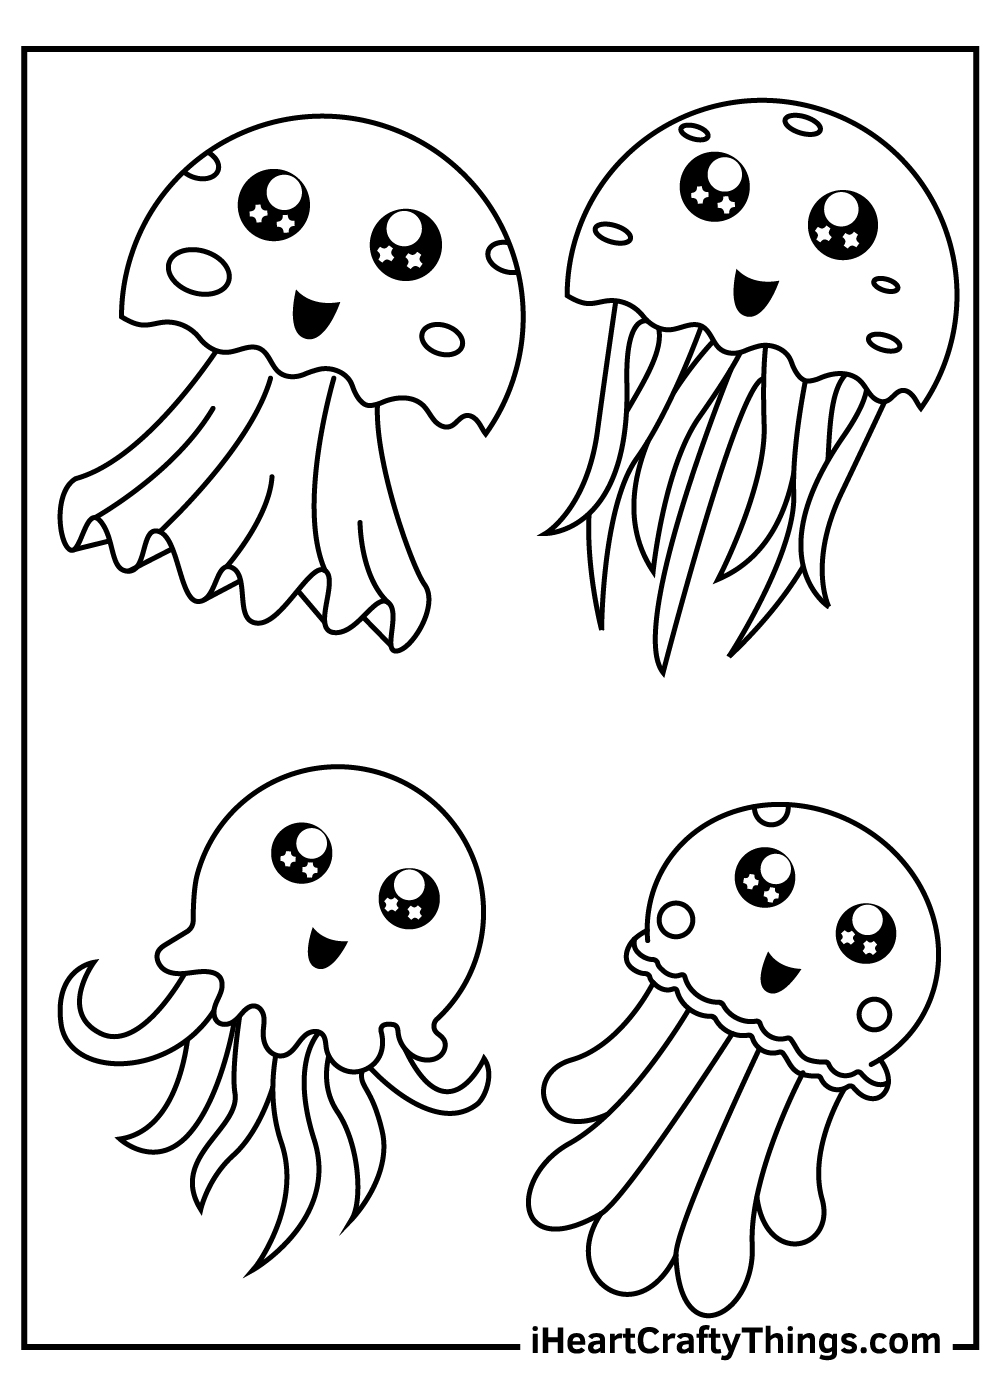 Jellyfish Coloring Pages Updated 20